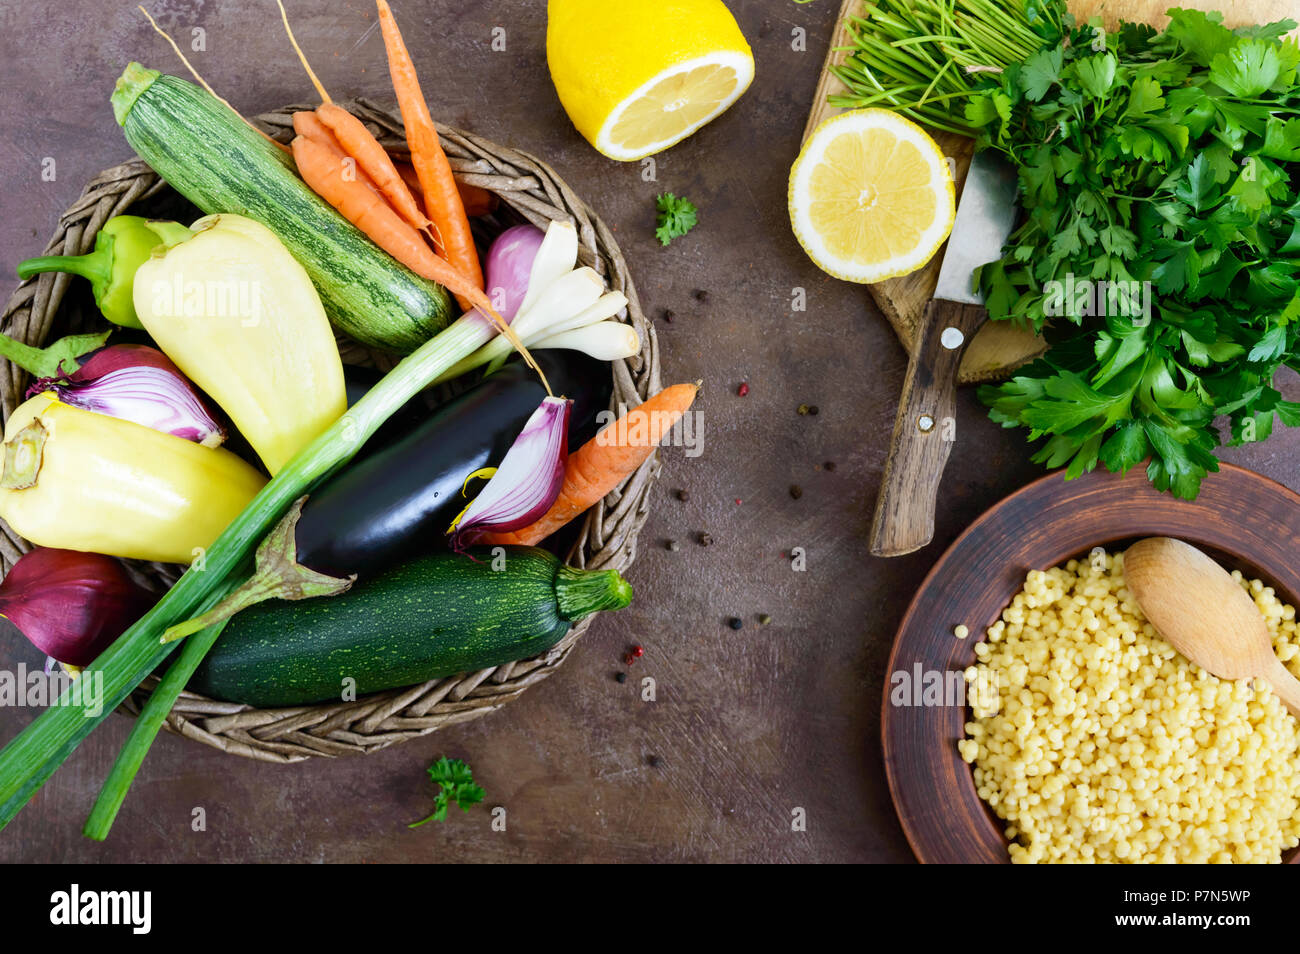 Delicious useful porridge cous cous in a clay plate and raw fresh vegetables in a basket, greens, lemon. Ingredients for cooking Tabbouleh. Vegetarian Stock Photo